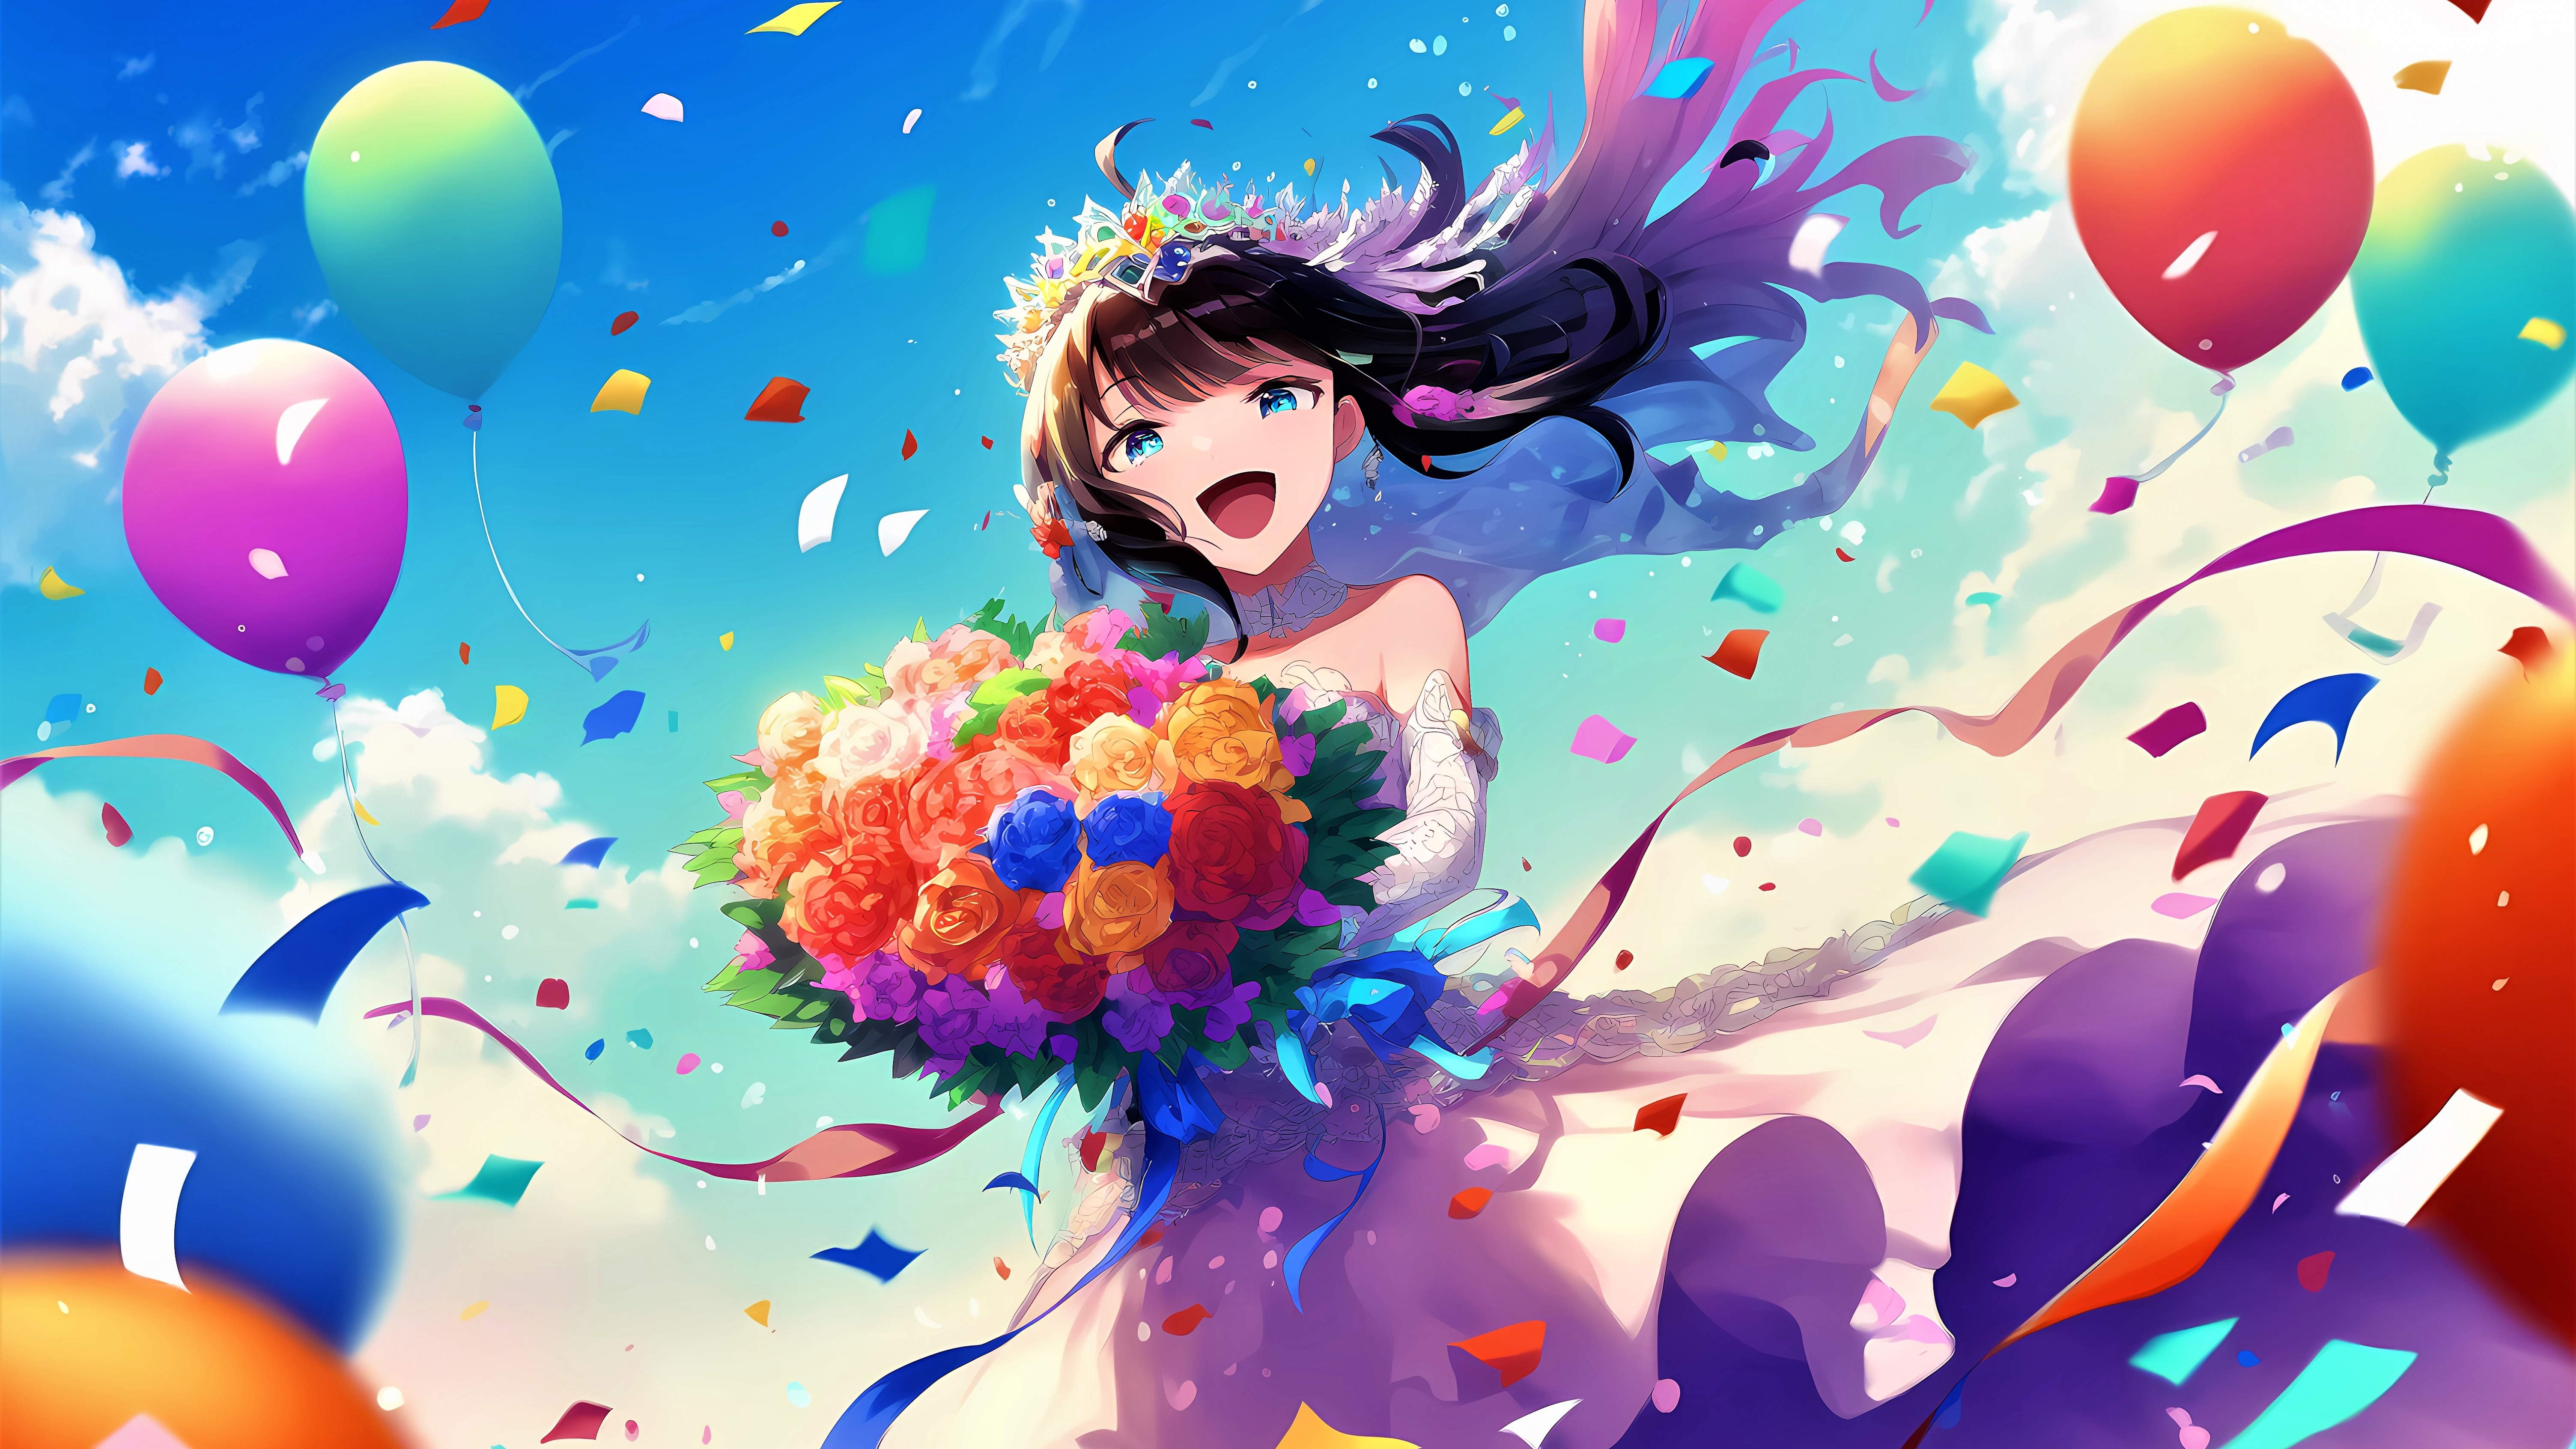 Cute Anime Girl Wallpaper HDAmazoncomAppstore for Android